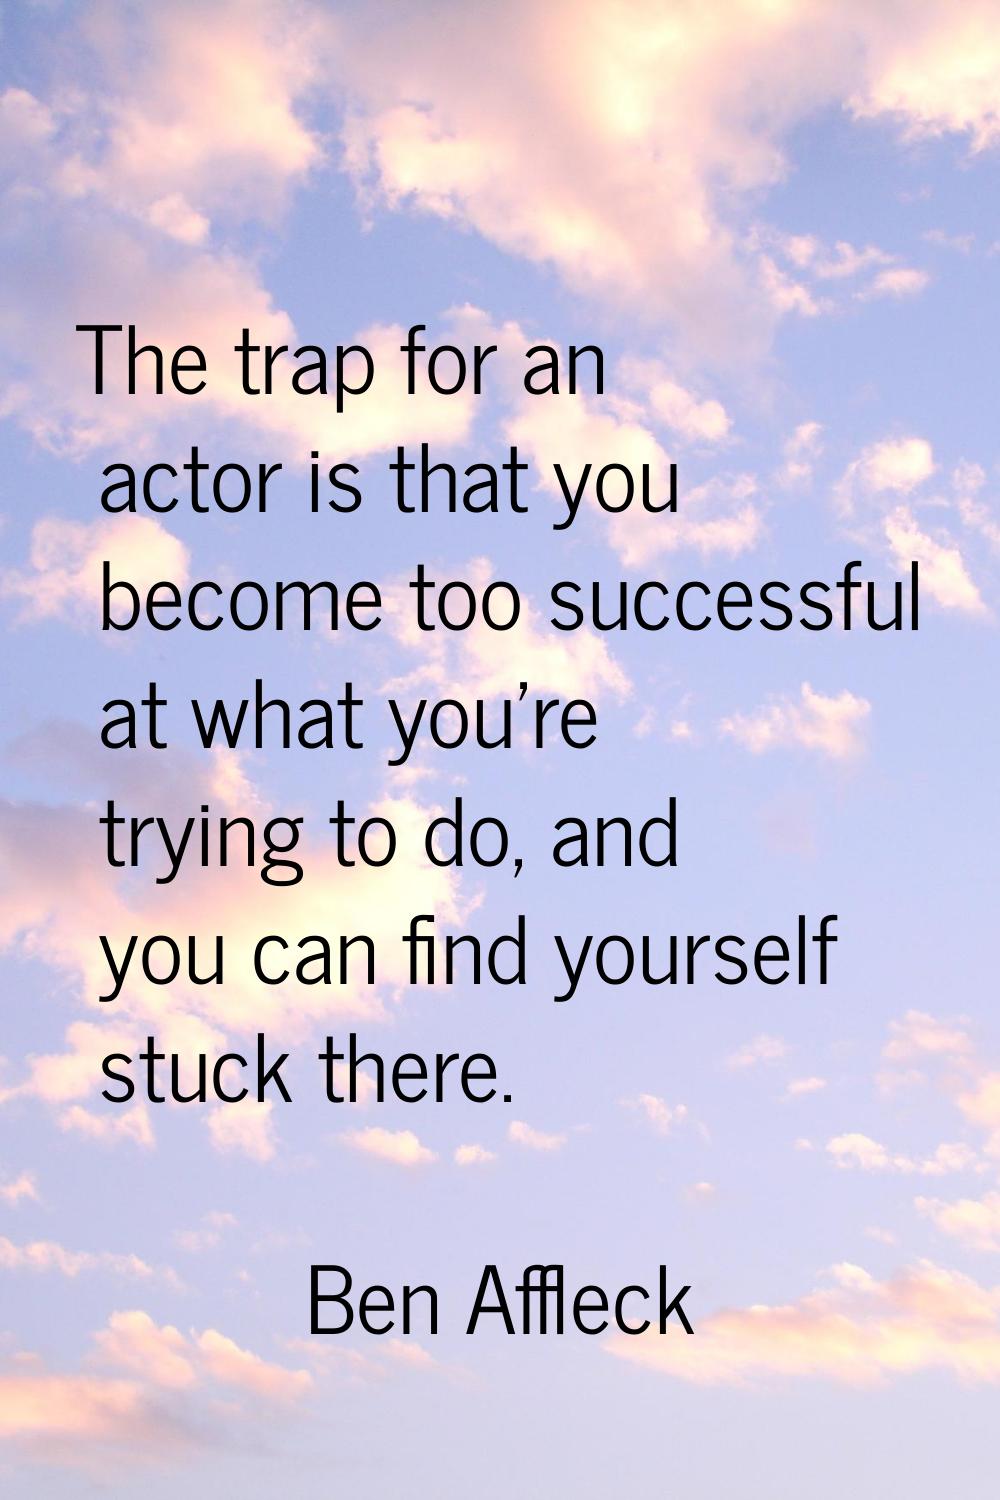 The trap for an actor is that you become too successful at what you're trying to do, and you can fi